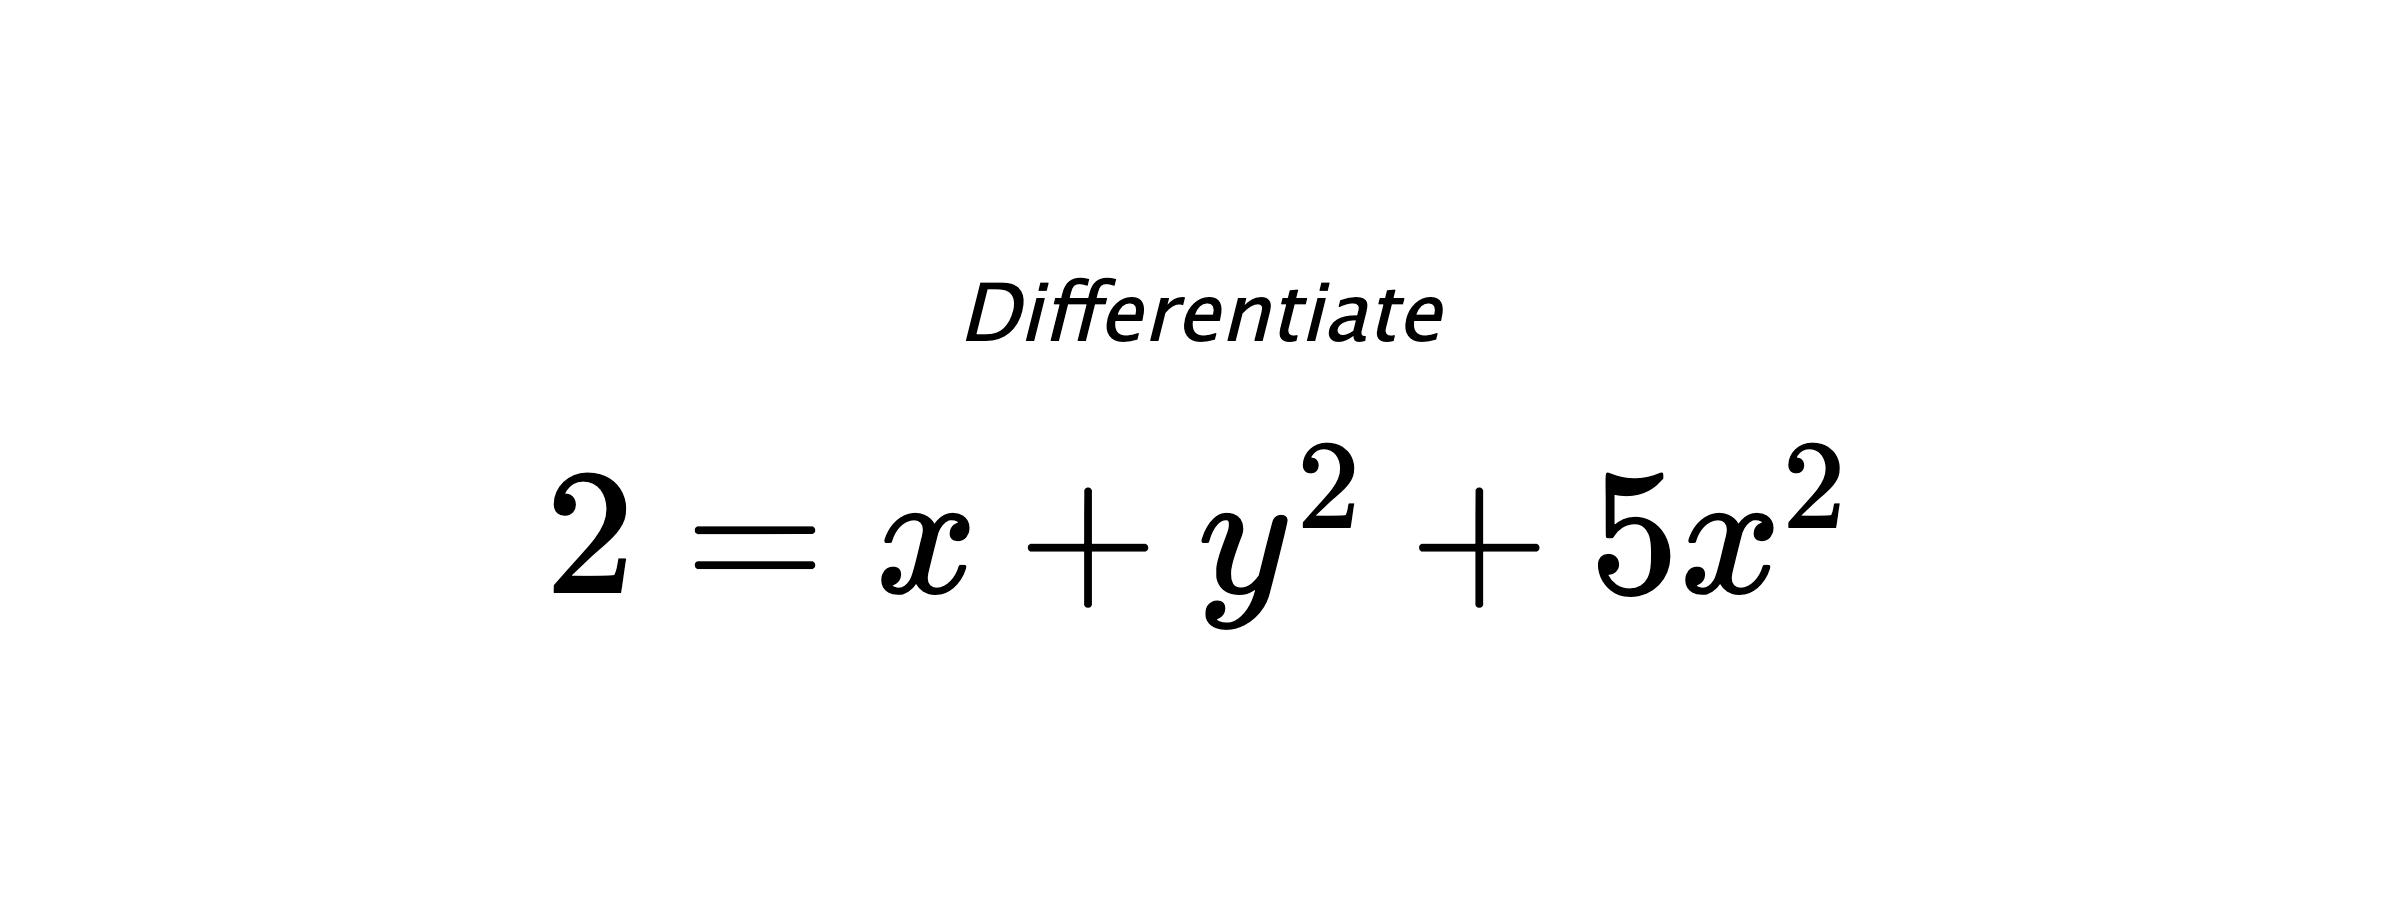 Differentiate $ 2 = x+y^2+5x^2 $